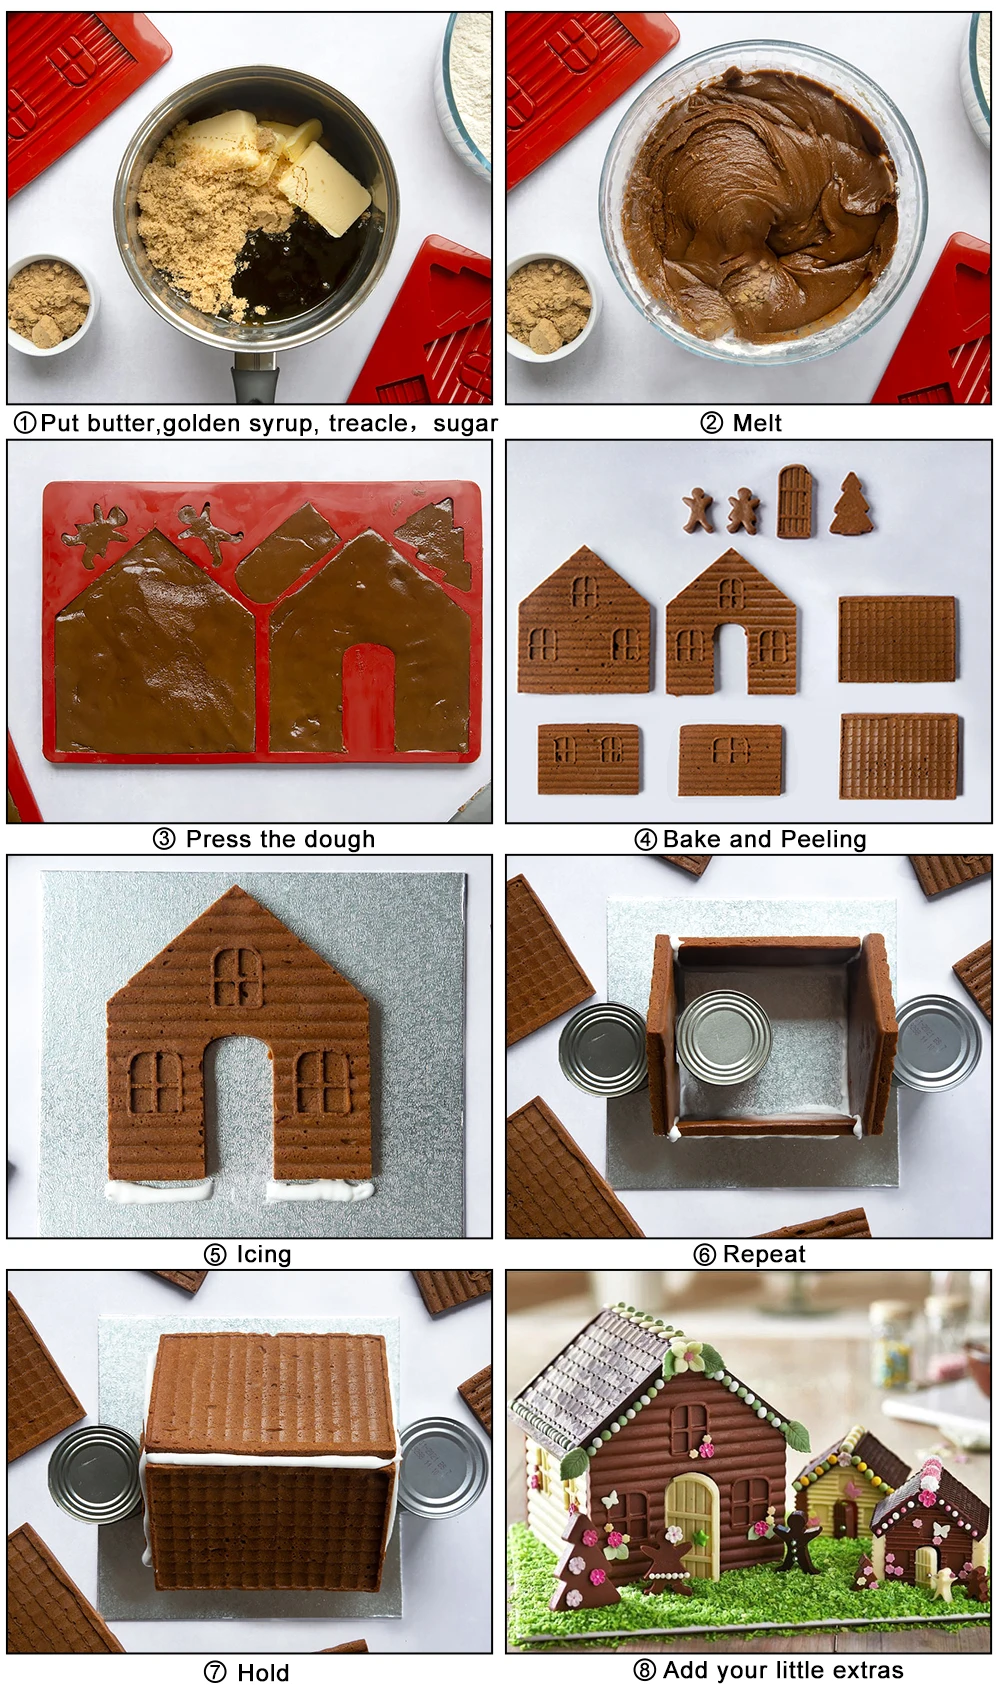 https://ae01.alicdn.com/kf/Sb0068b1ba71a43c685b8785594ef3a97R/SILIKOLOVE-2-Pcs-Set-Christmas-3D-Gingerbread-House-Silicone-Mold-DIY-Baking-Chocolate-Cake-Mould-Biscuits.jpg